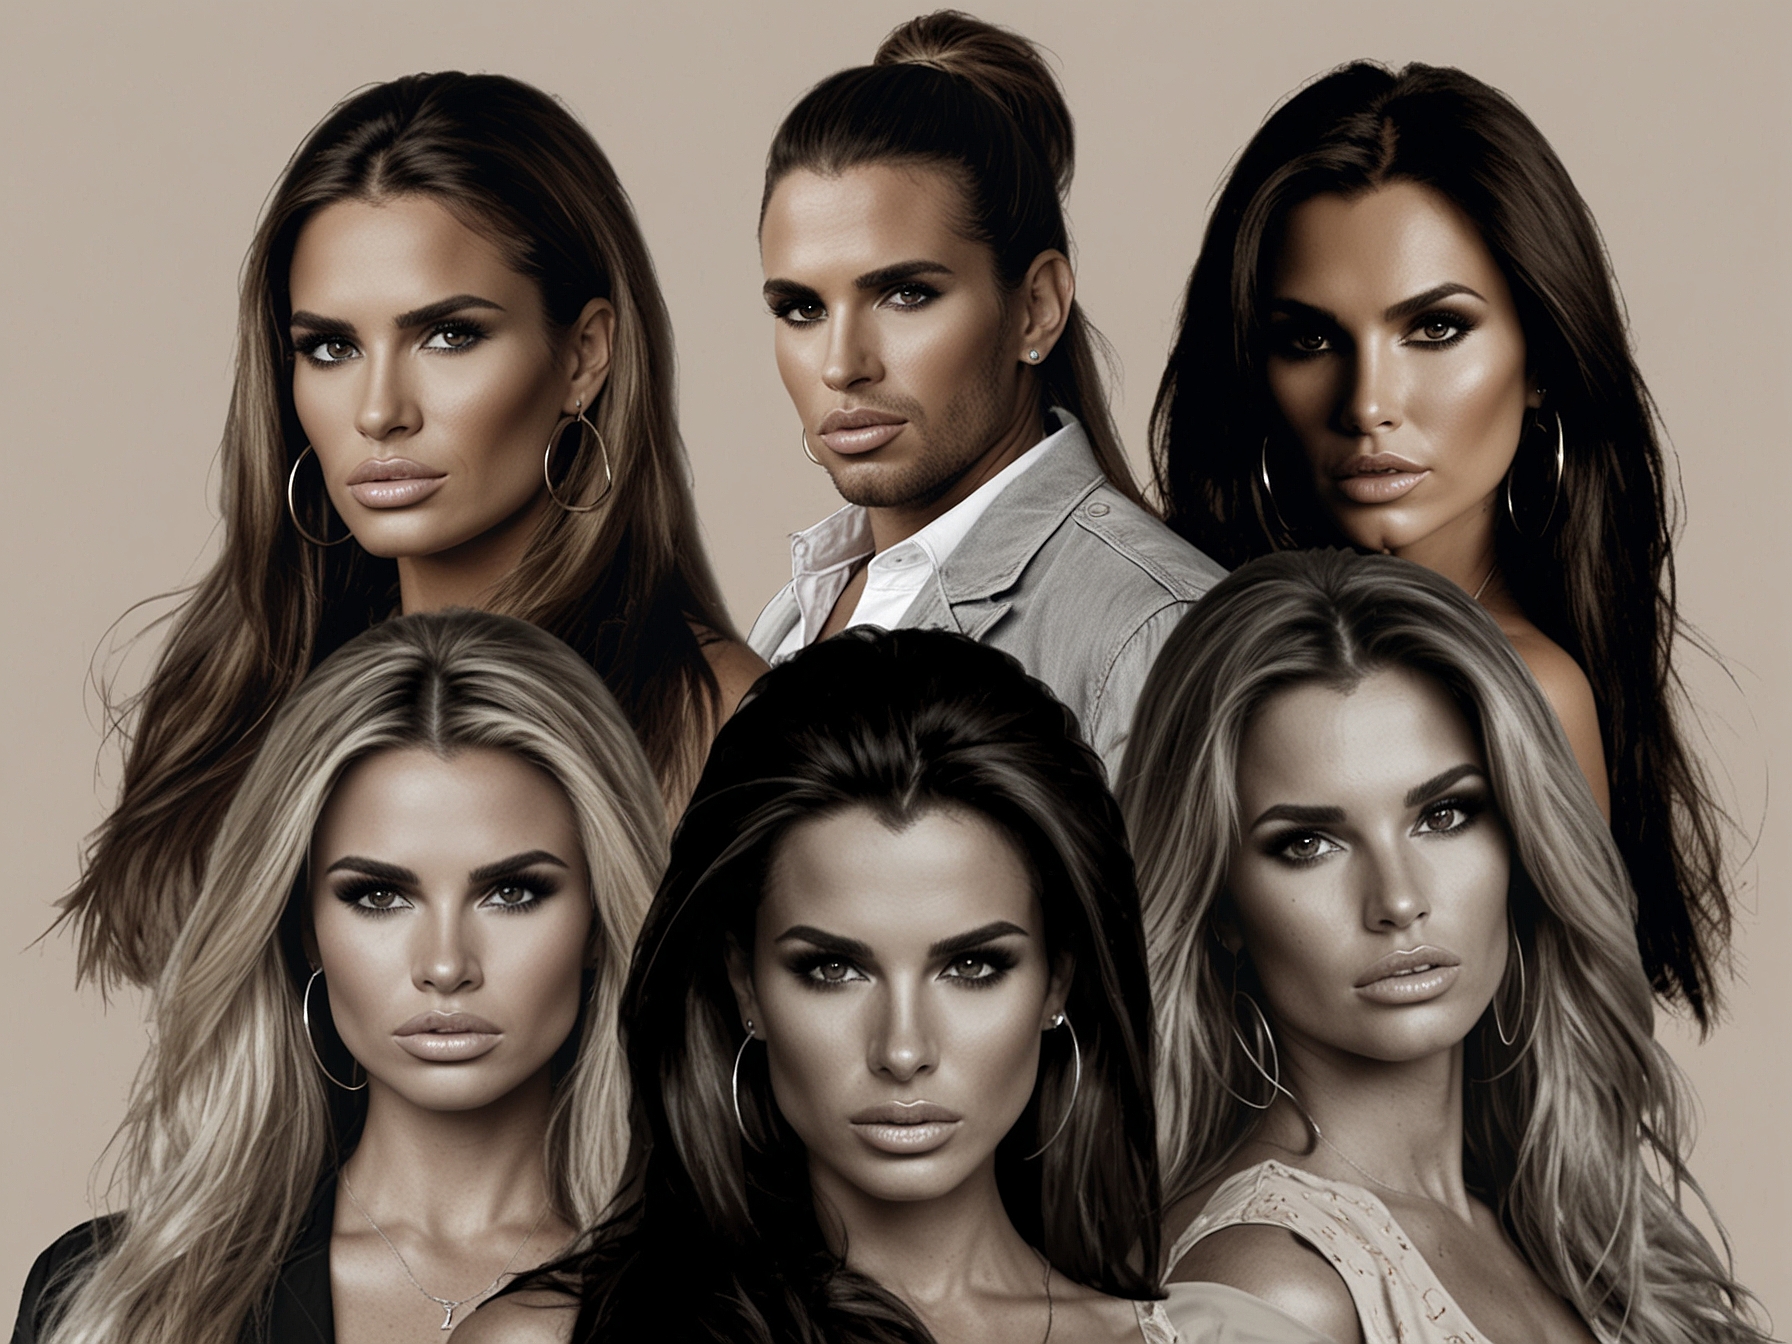 A collage of photos featuring Katie Price with her various ex-partners during happier times.